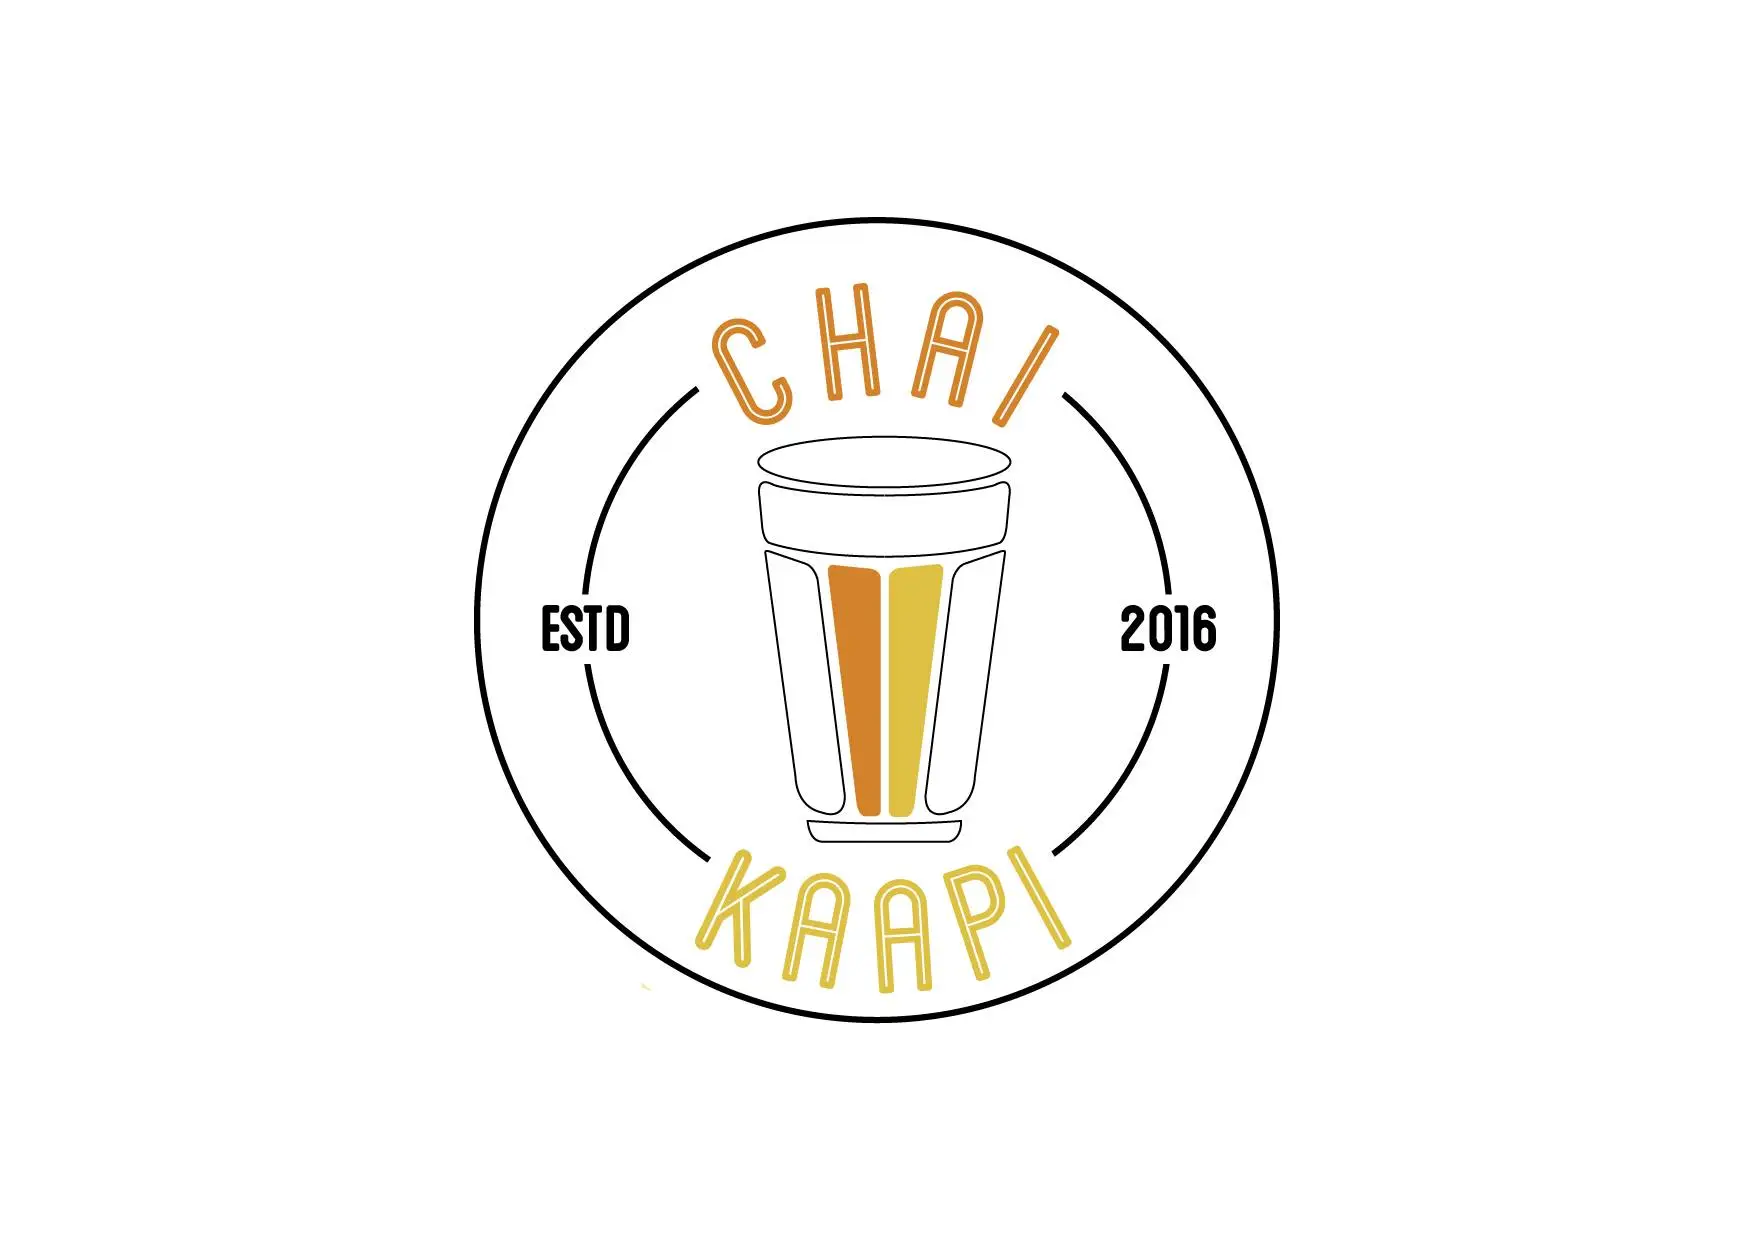 Chai Kaapi: A Low-Investment Franchise Opportunity Under 20 Lakhs in India